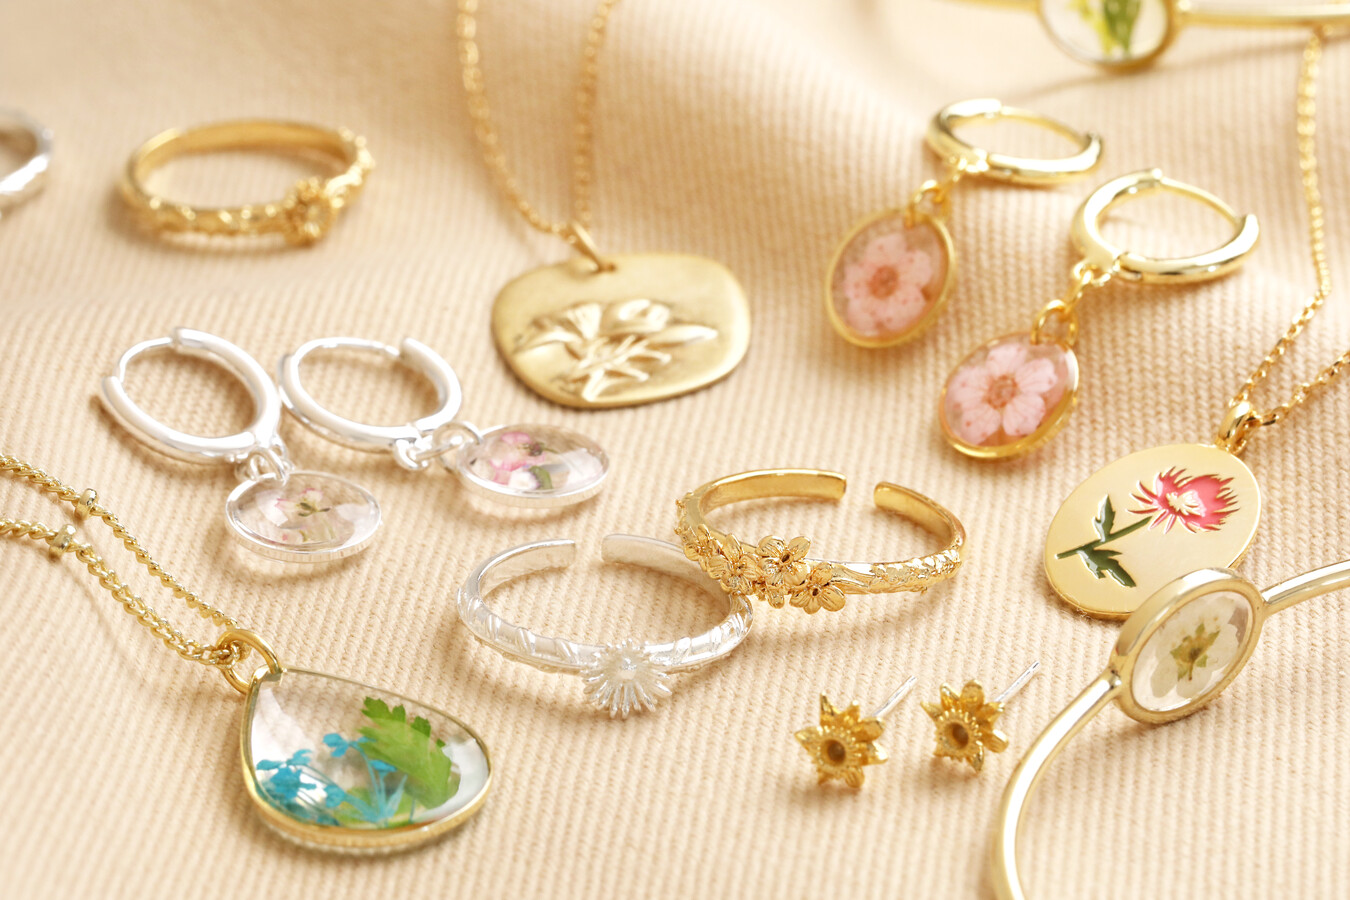 Birth Flower Jewellery Pieces Make Wonderful Birthday Presents for Loved Ones